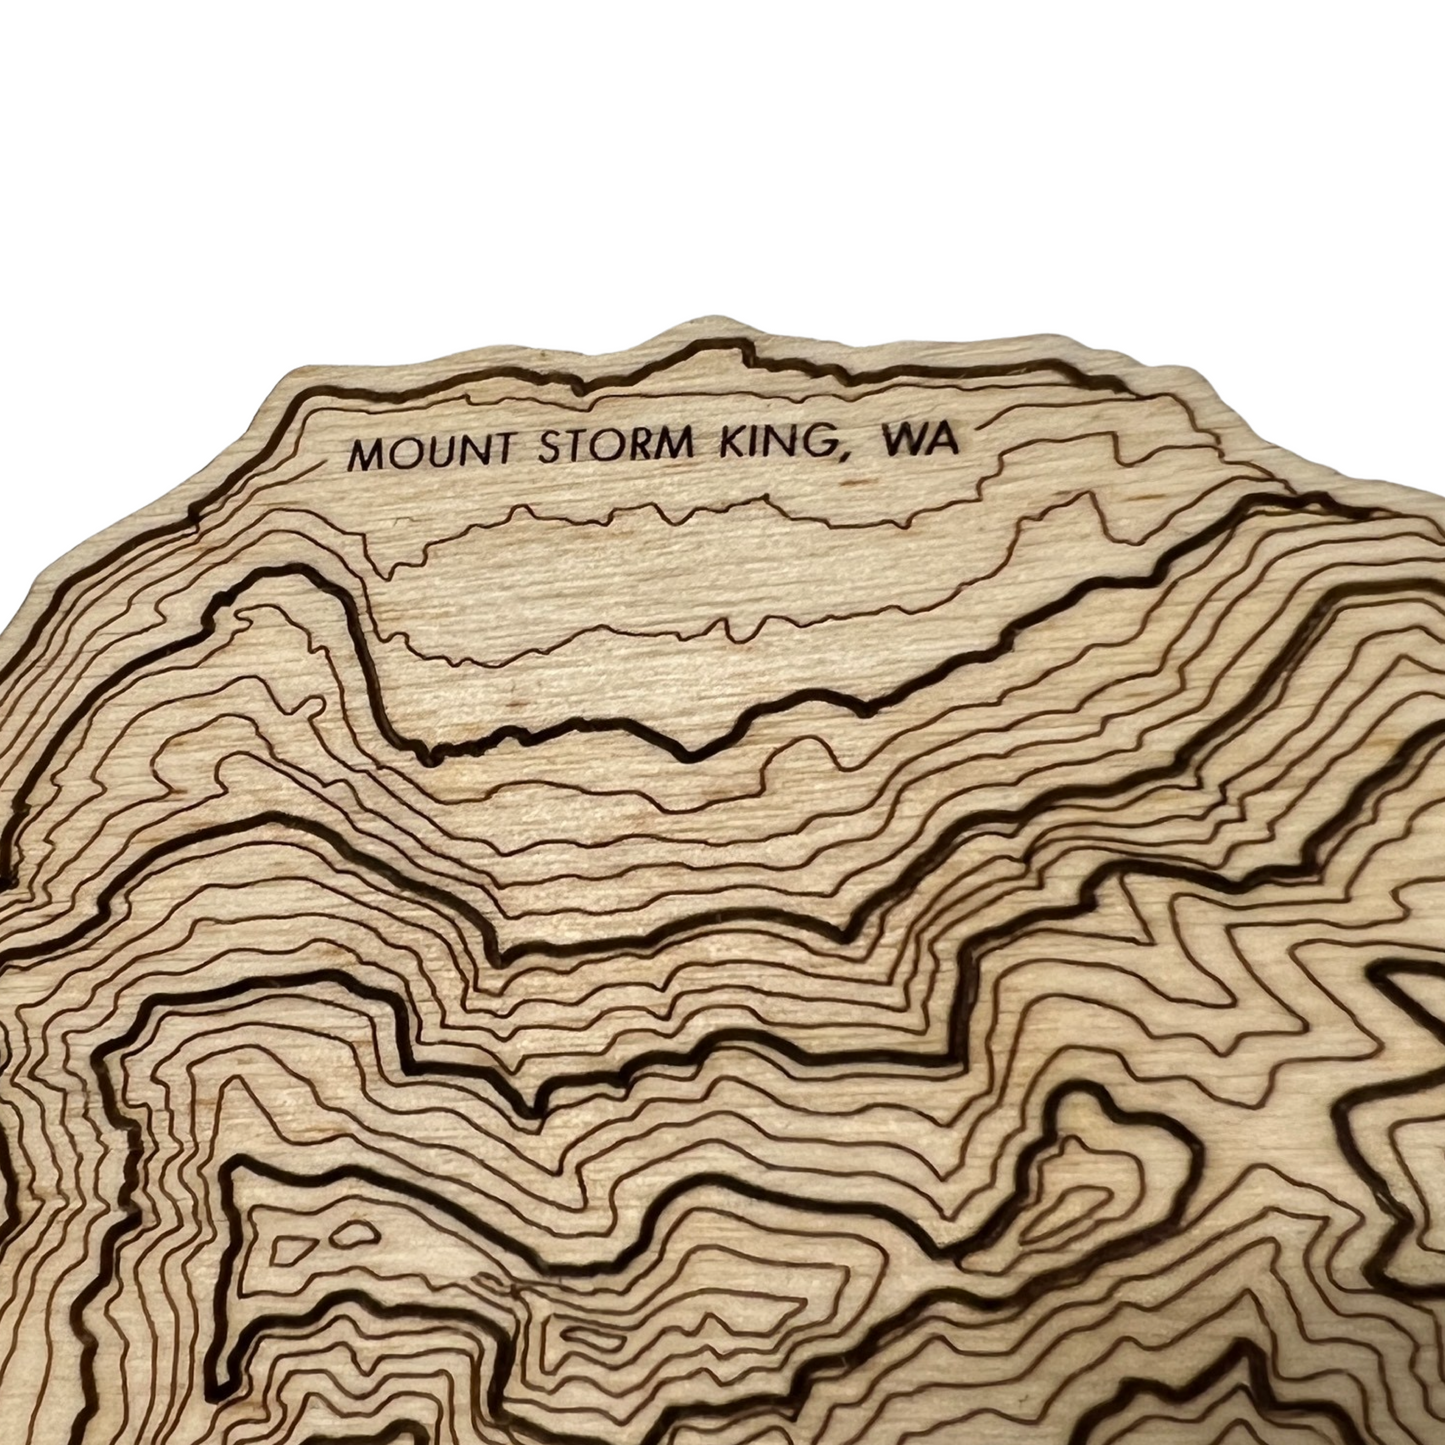 MT. STORM KING topography coaster